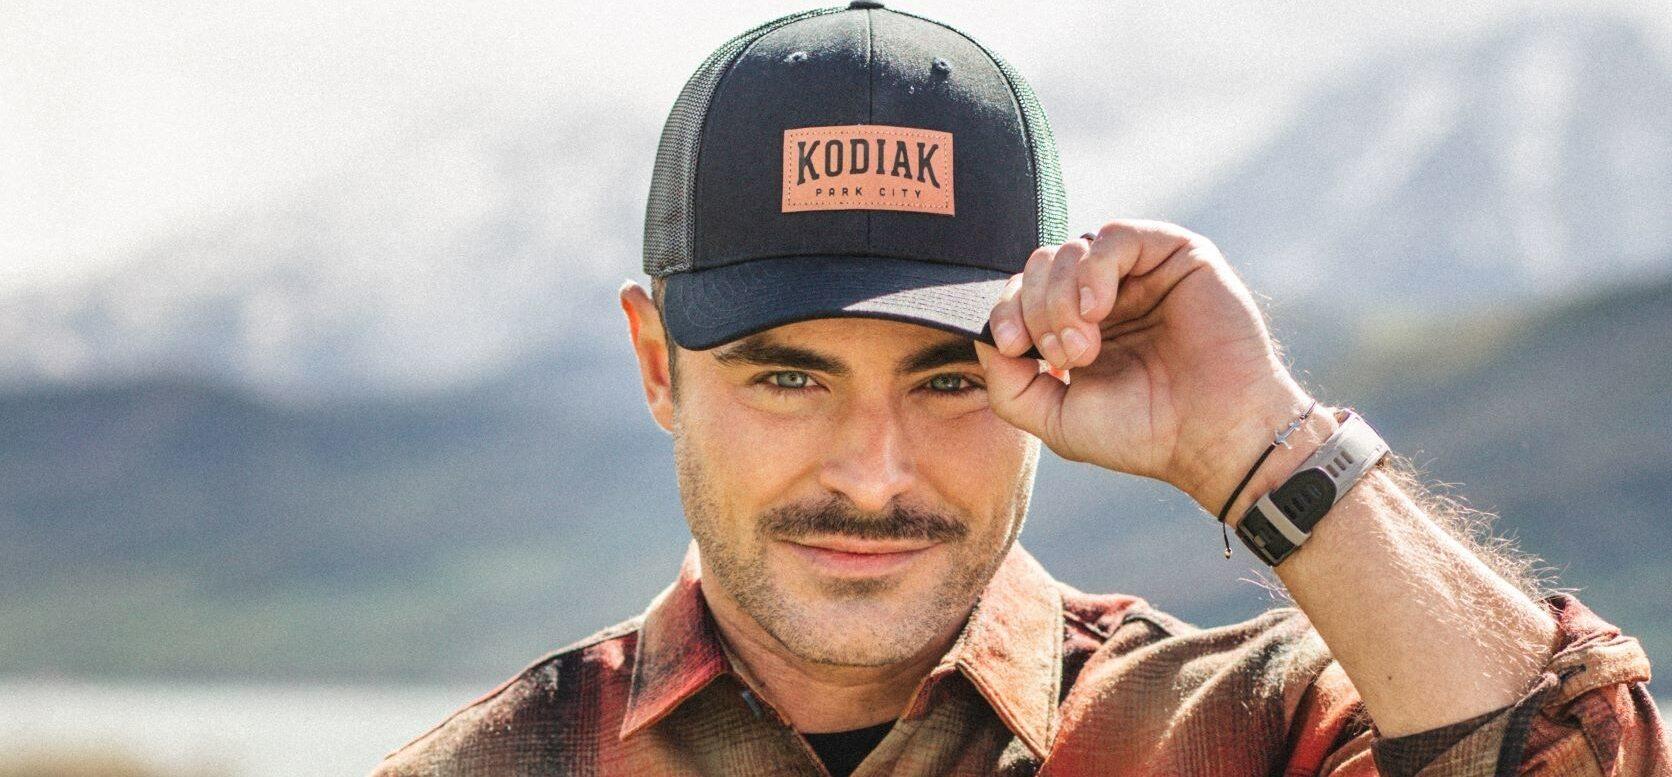 Kodiak the fast-growing food brand known for its 100 whole grain and protein-packed breakfast and snacking products and actor producer Zac Efron